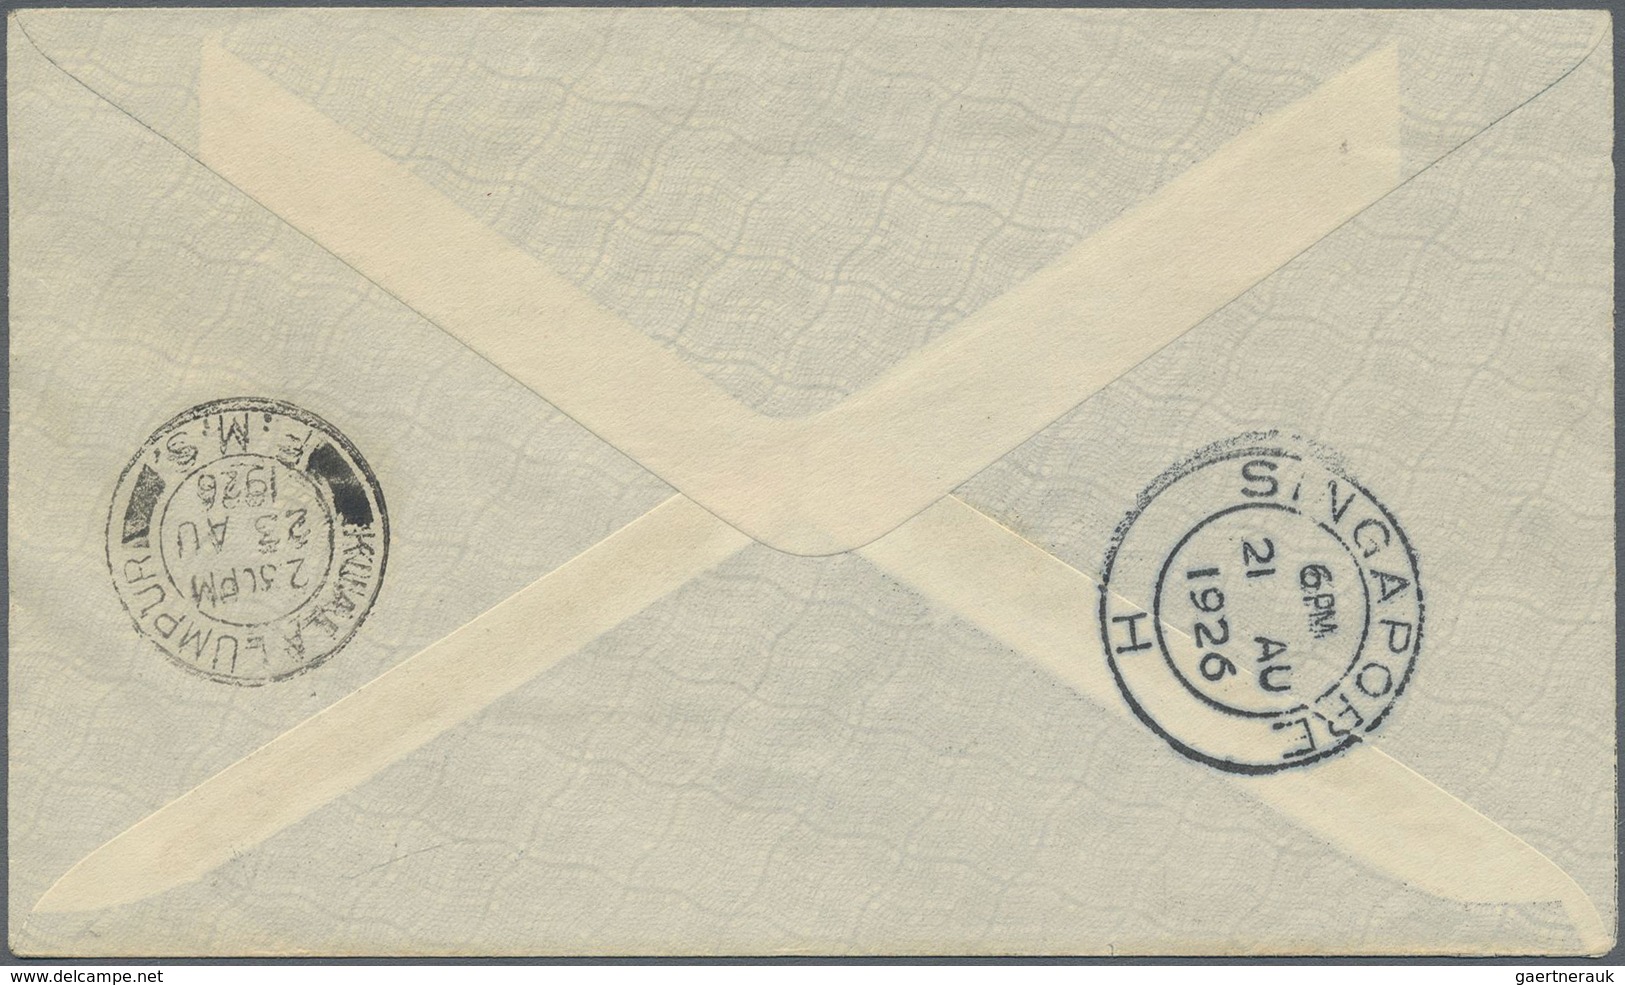 Br Malaiische Staaten - Straits Settlements: 1926 Early Singapore-Kuala Lumpur Airmail Cover Franked KG - Straits Settlements